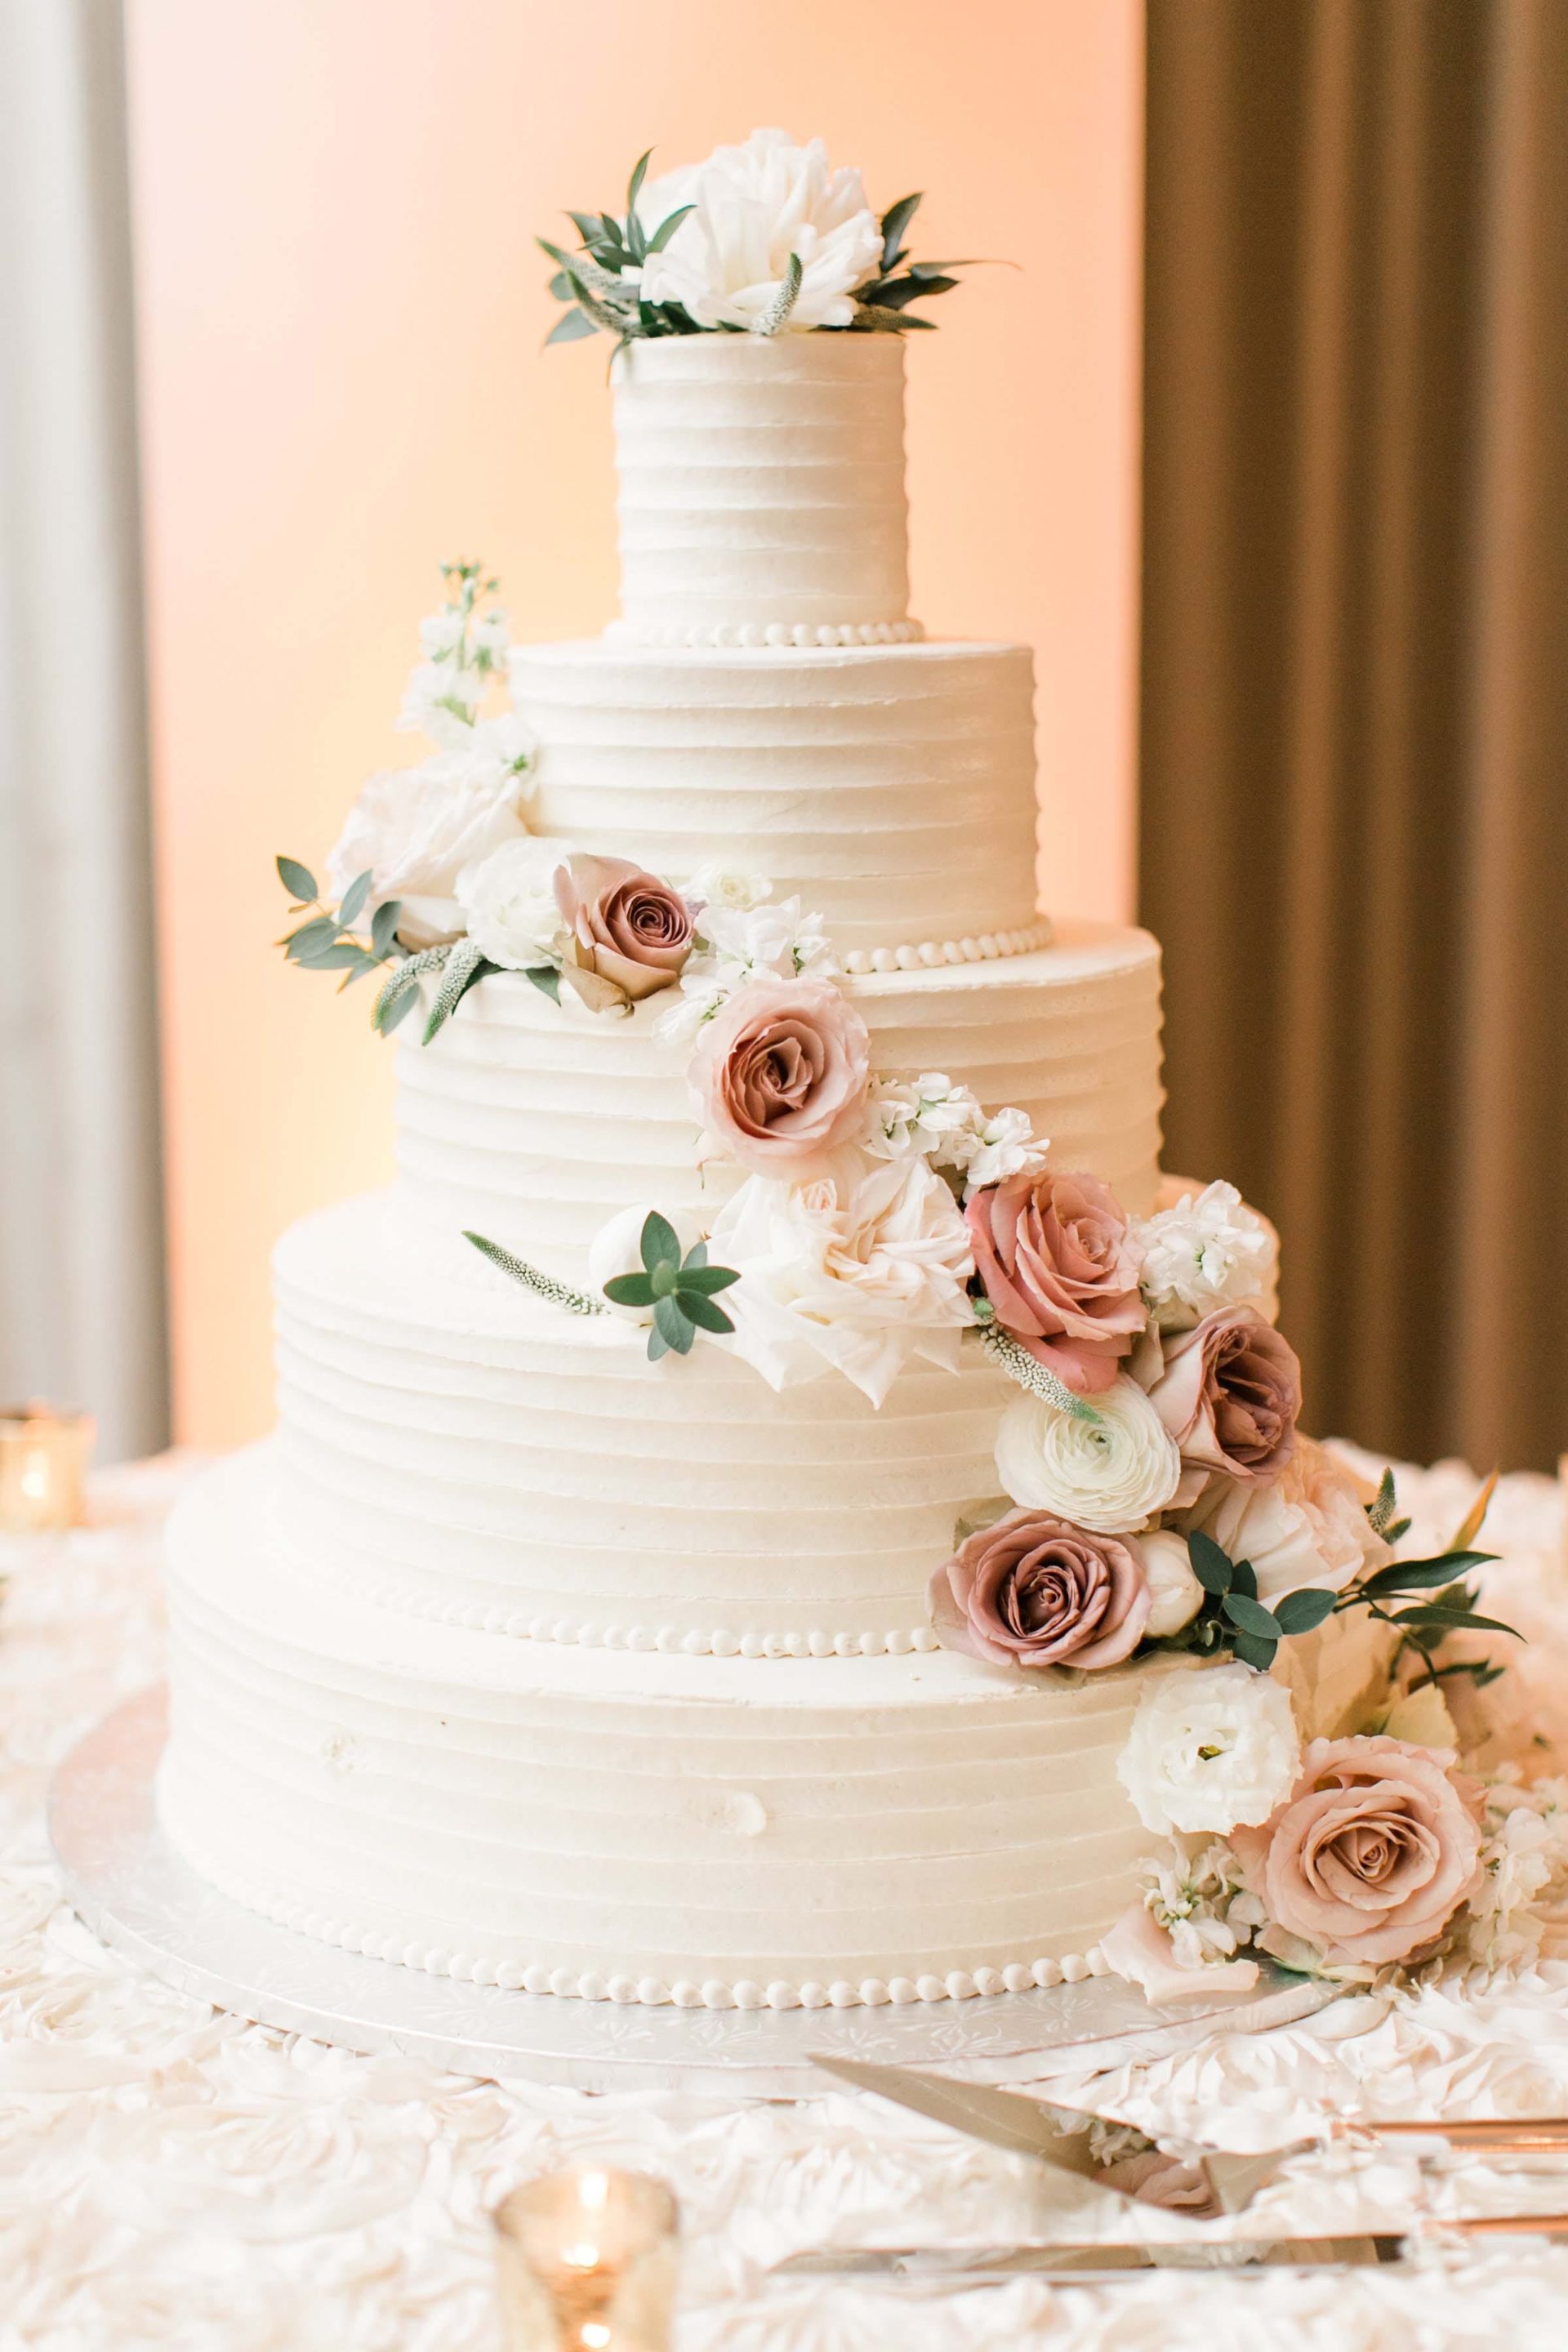 Five layer wedding cake with white icing and garland of fresh flowers.